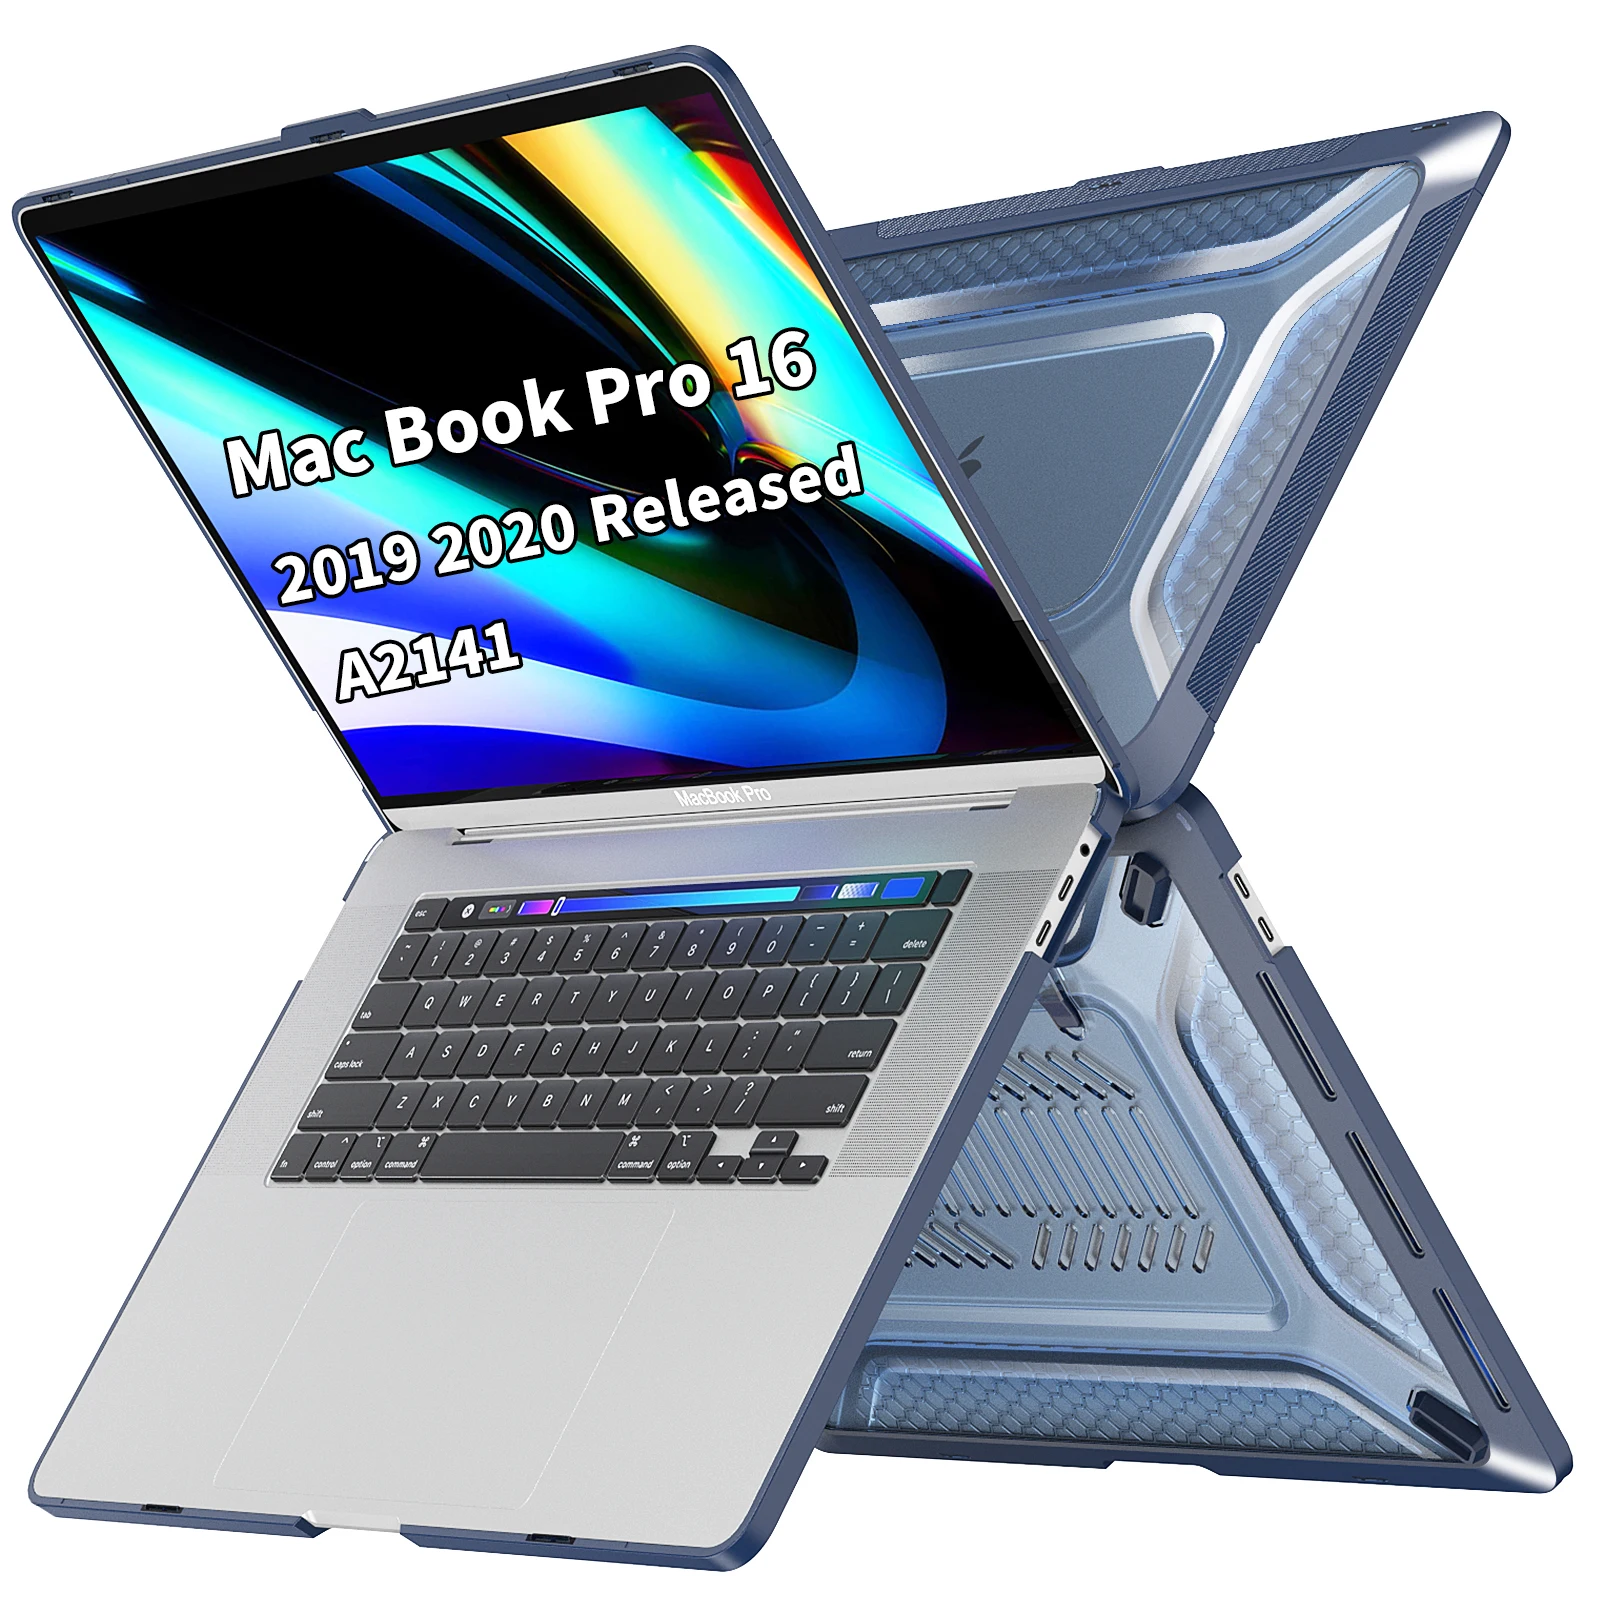 

Case For MacBook Pro 16 Inch A2141 (2019 Release) Shock-Absorbing Protection Laptop Cover With Folding Stand For Pro 16” 2020